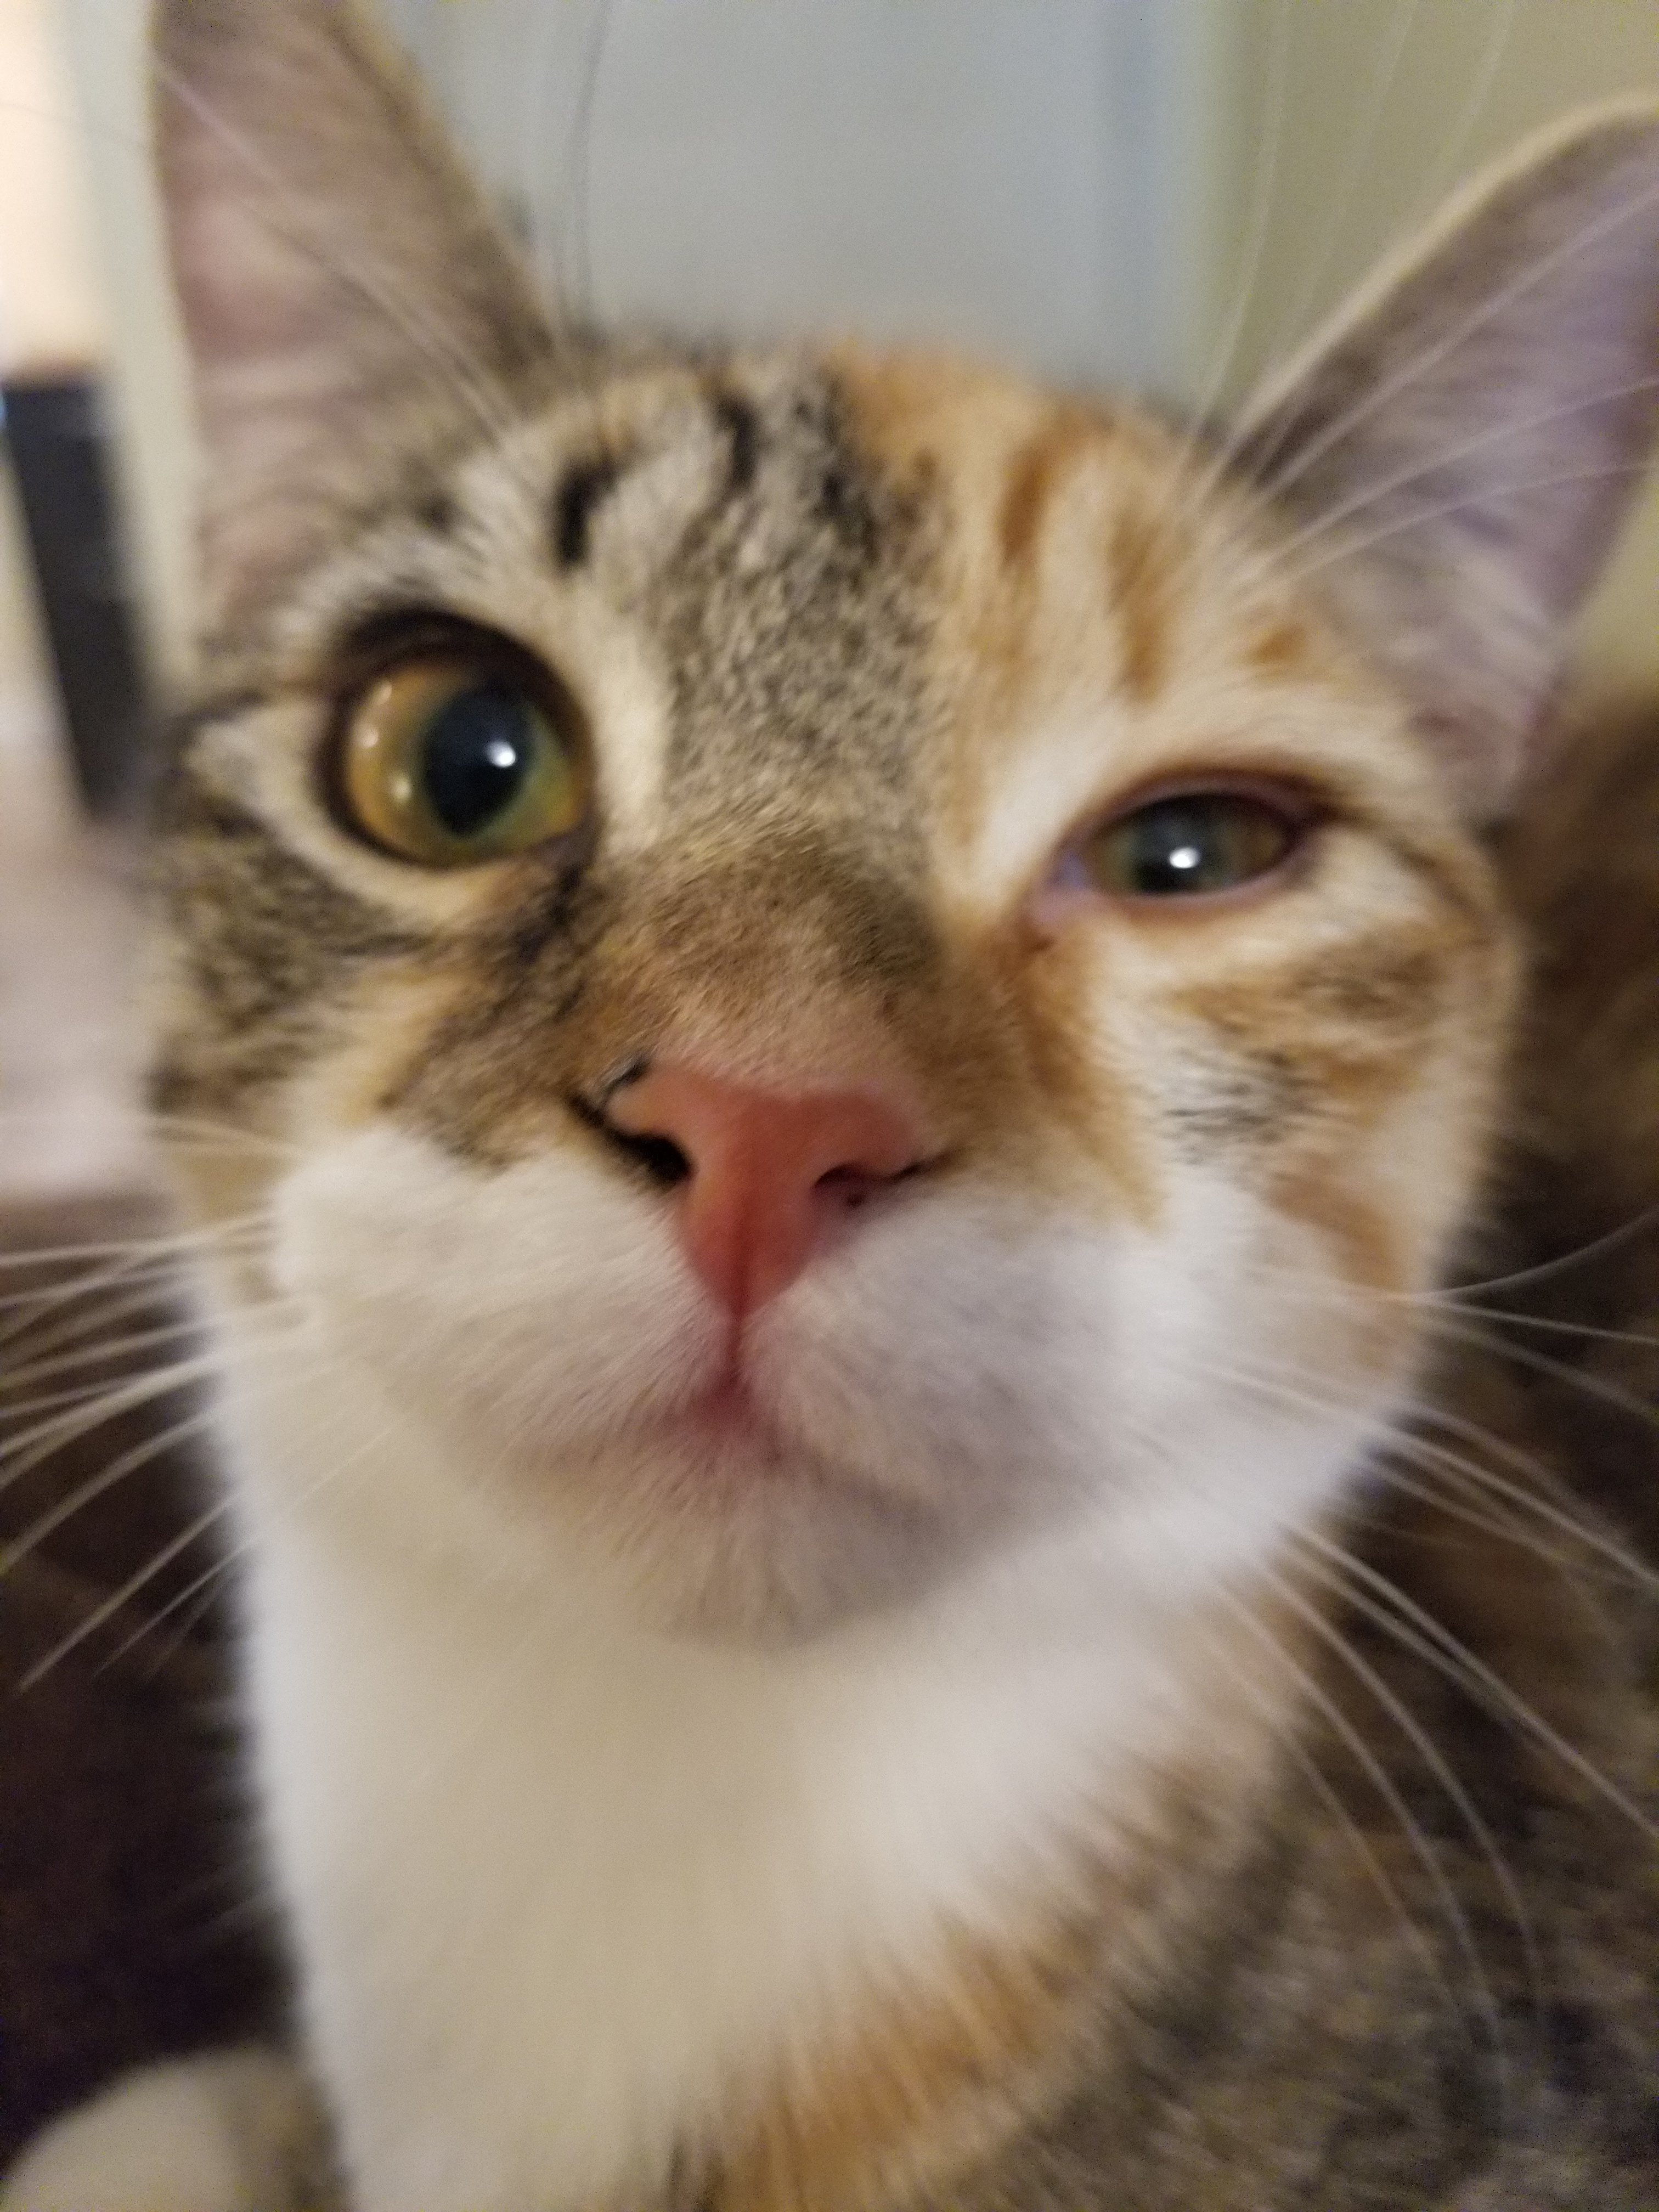 Cat keeps squinting? TheCatSite